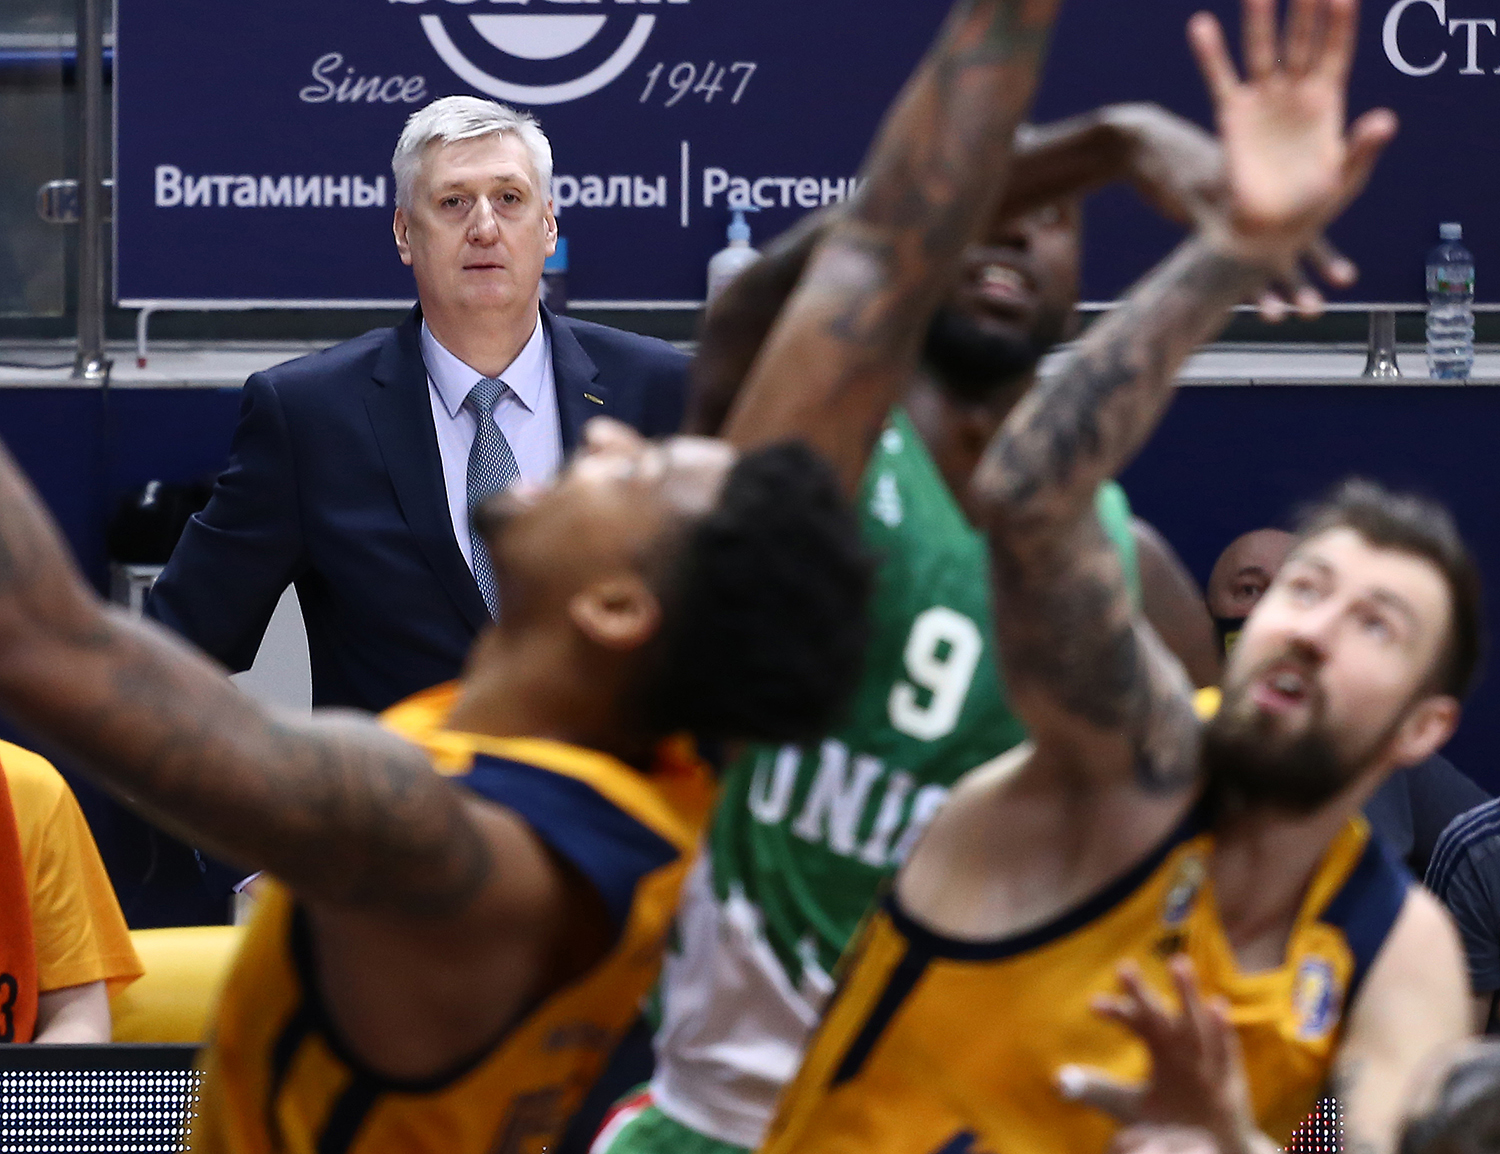 Coach change doesn’t help Khimki beat UNICS, Gora come back from -20, Mikhailovskii set career-high. Week in review